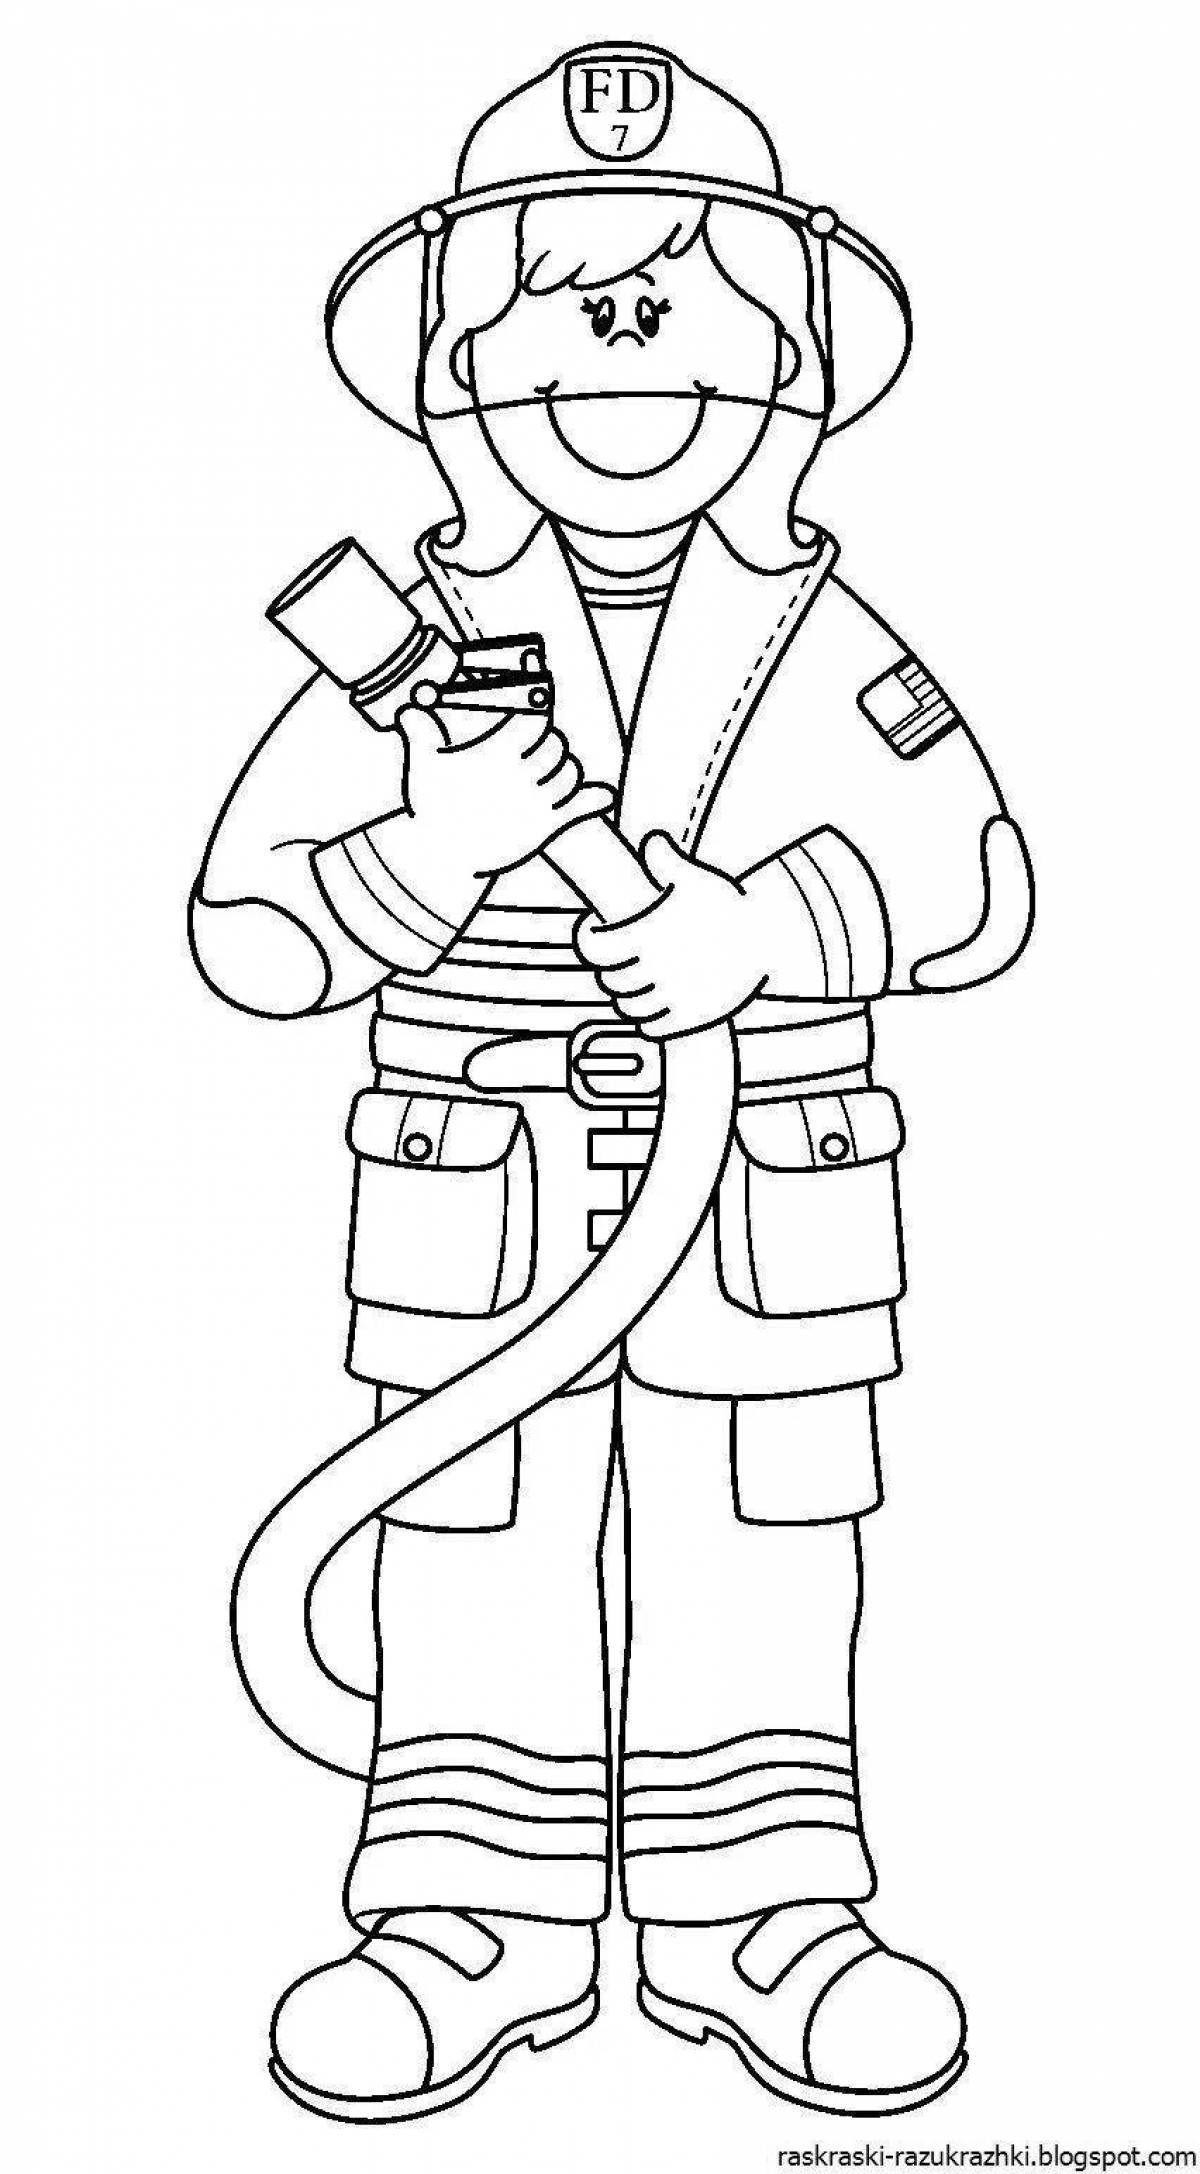 Coloring book stimulating profession firefighter